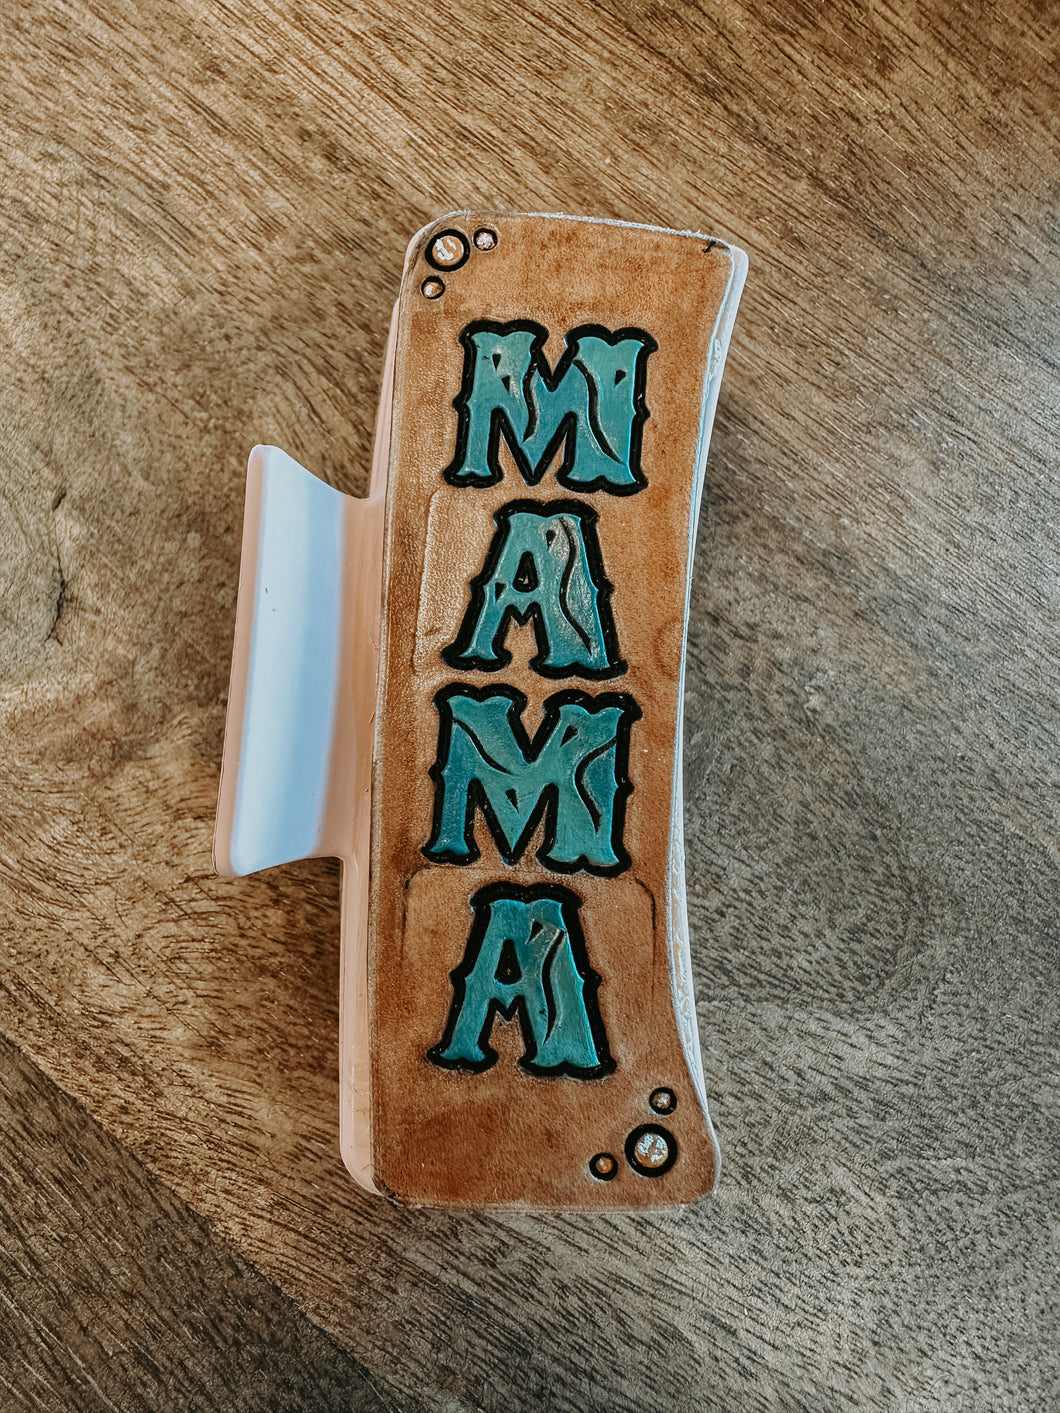 “MAMA” tooled claw clips